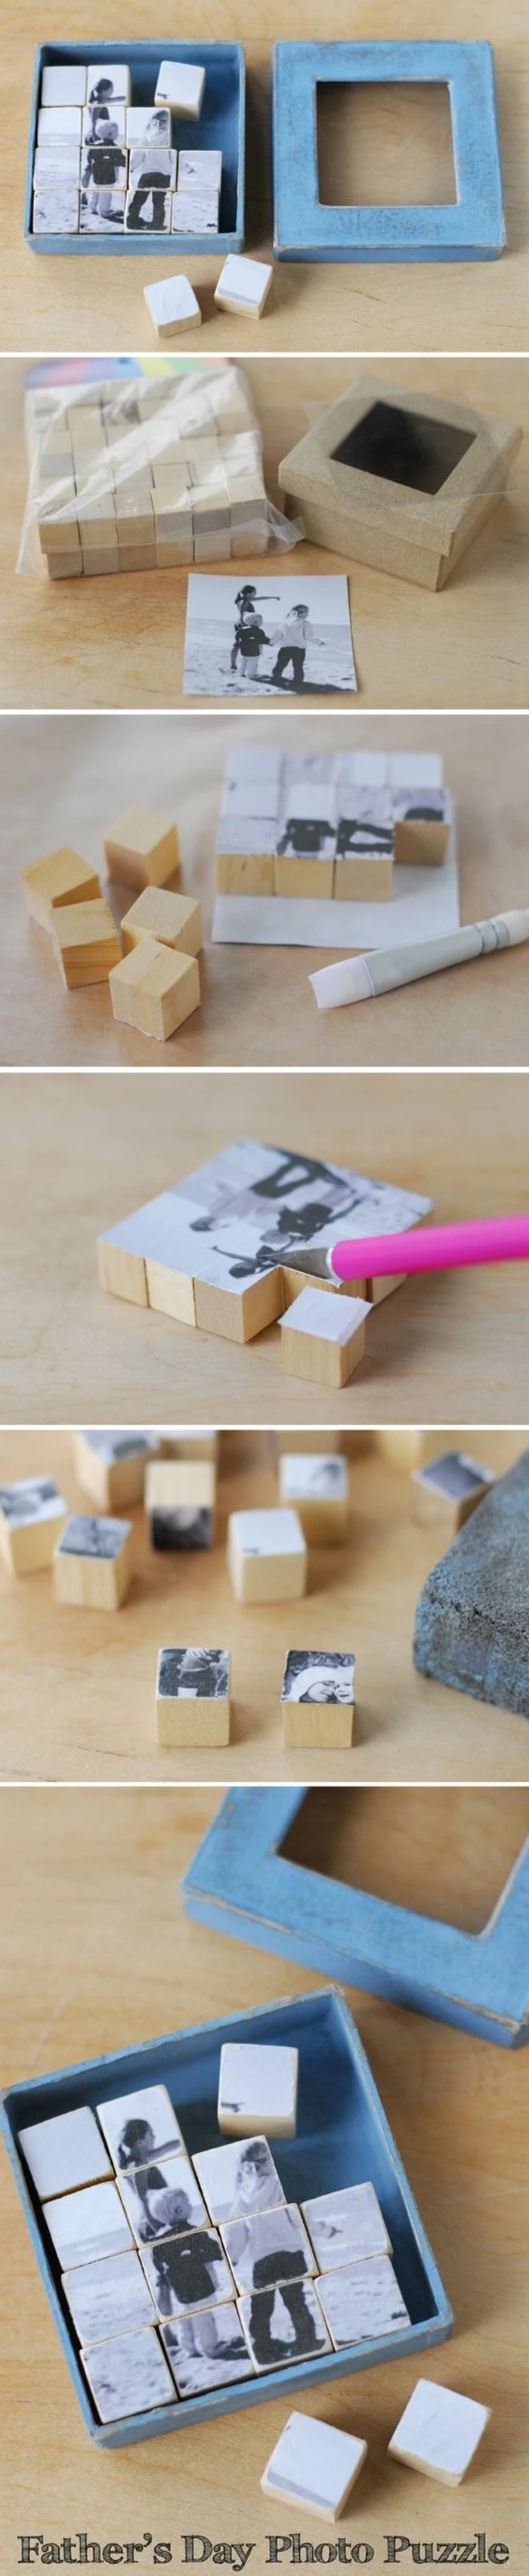 wooden blocks, photo puzzle, black and white photo, wooden box, crafts to do when bored